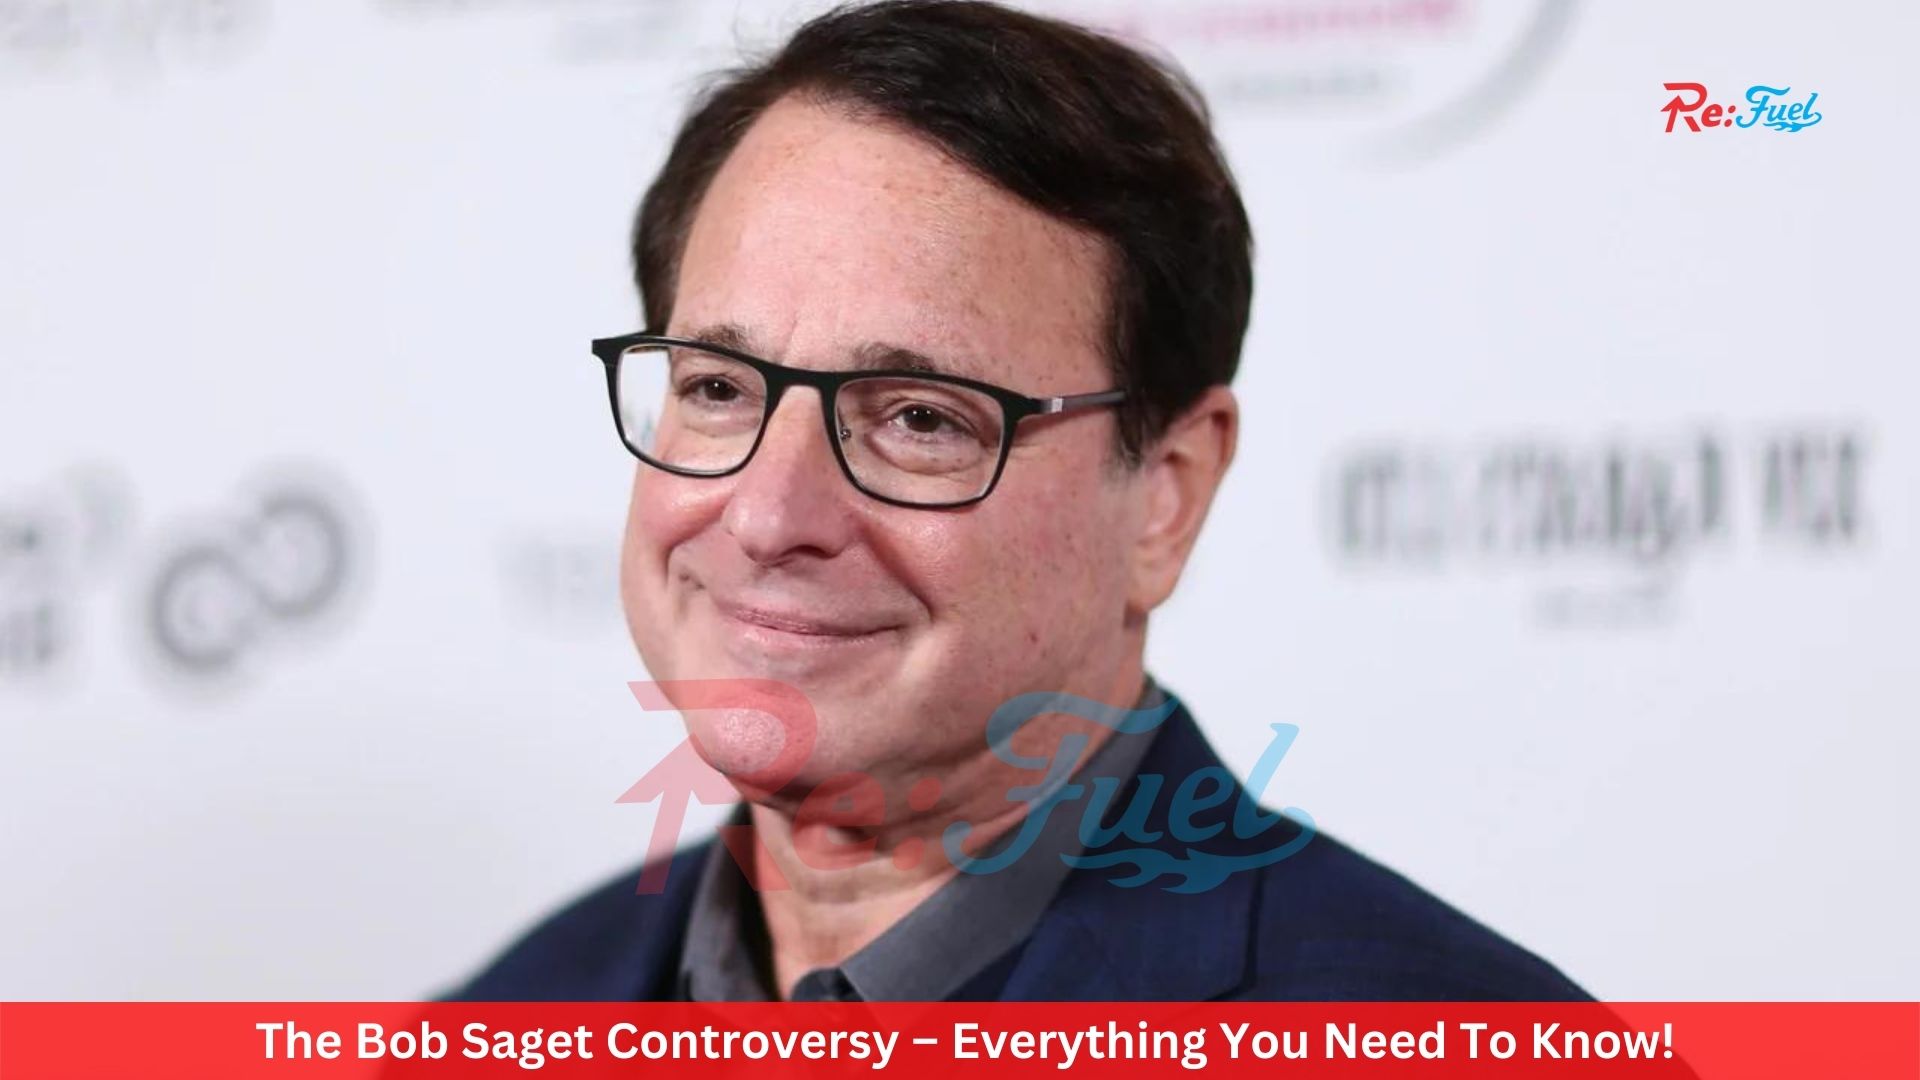 The Bob Saget Controversy – Everything You Need To Know!